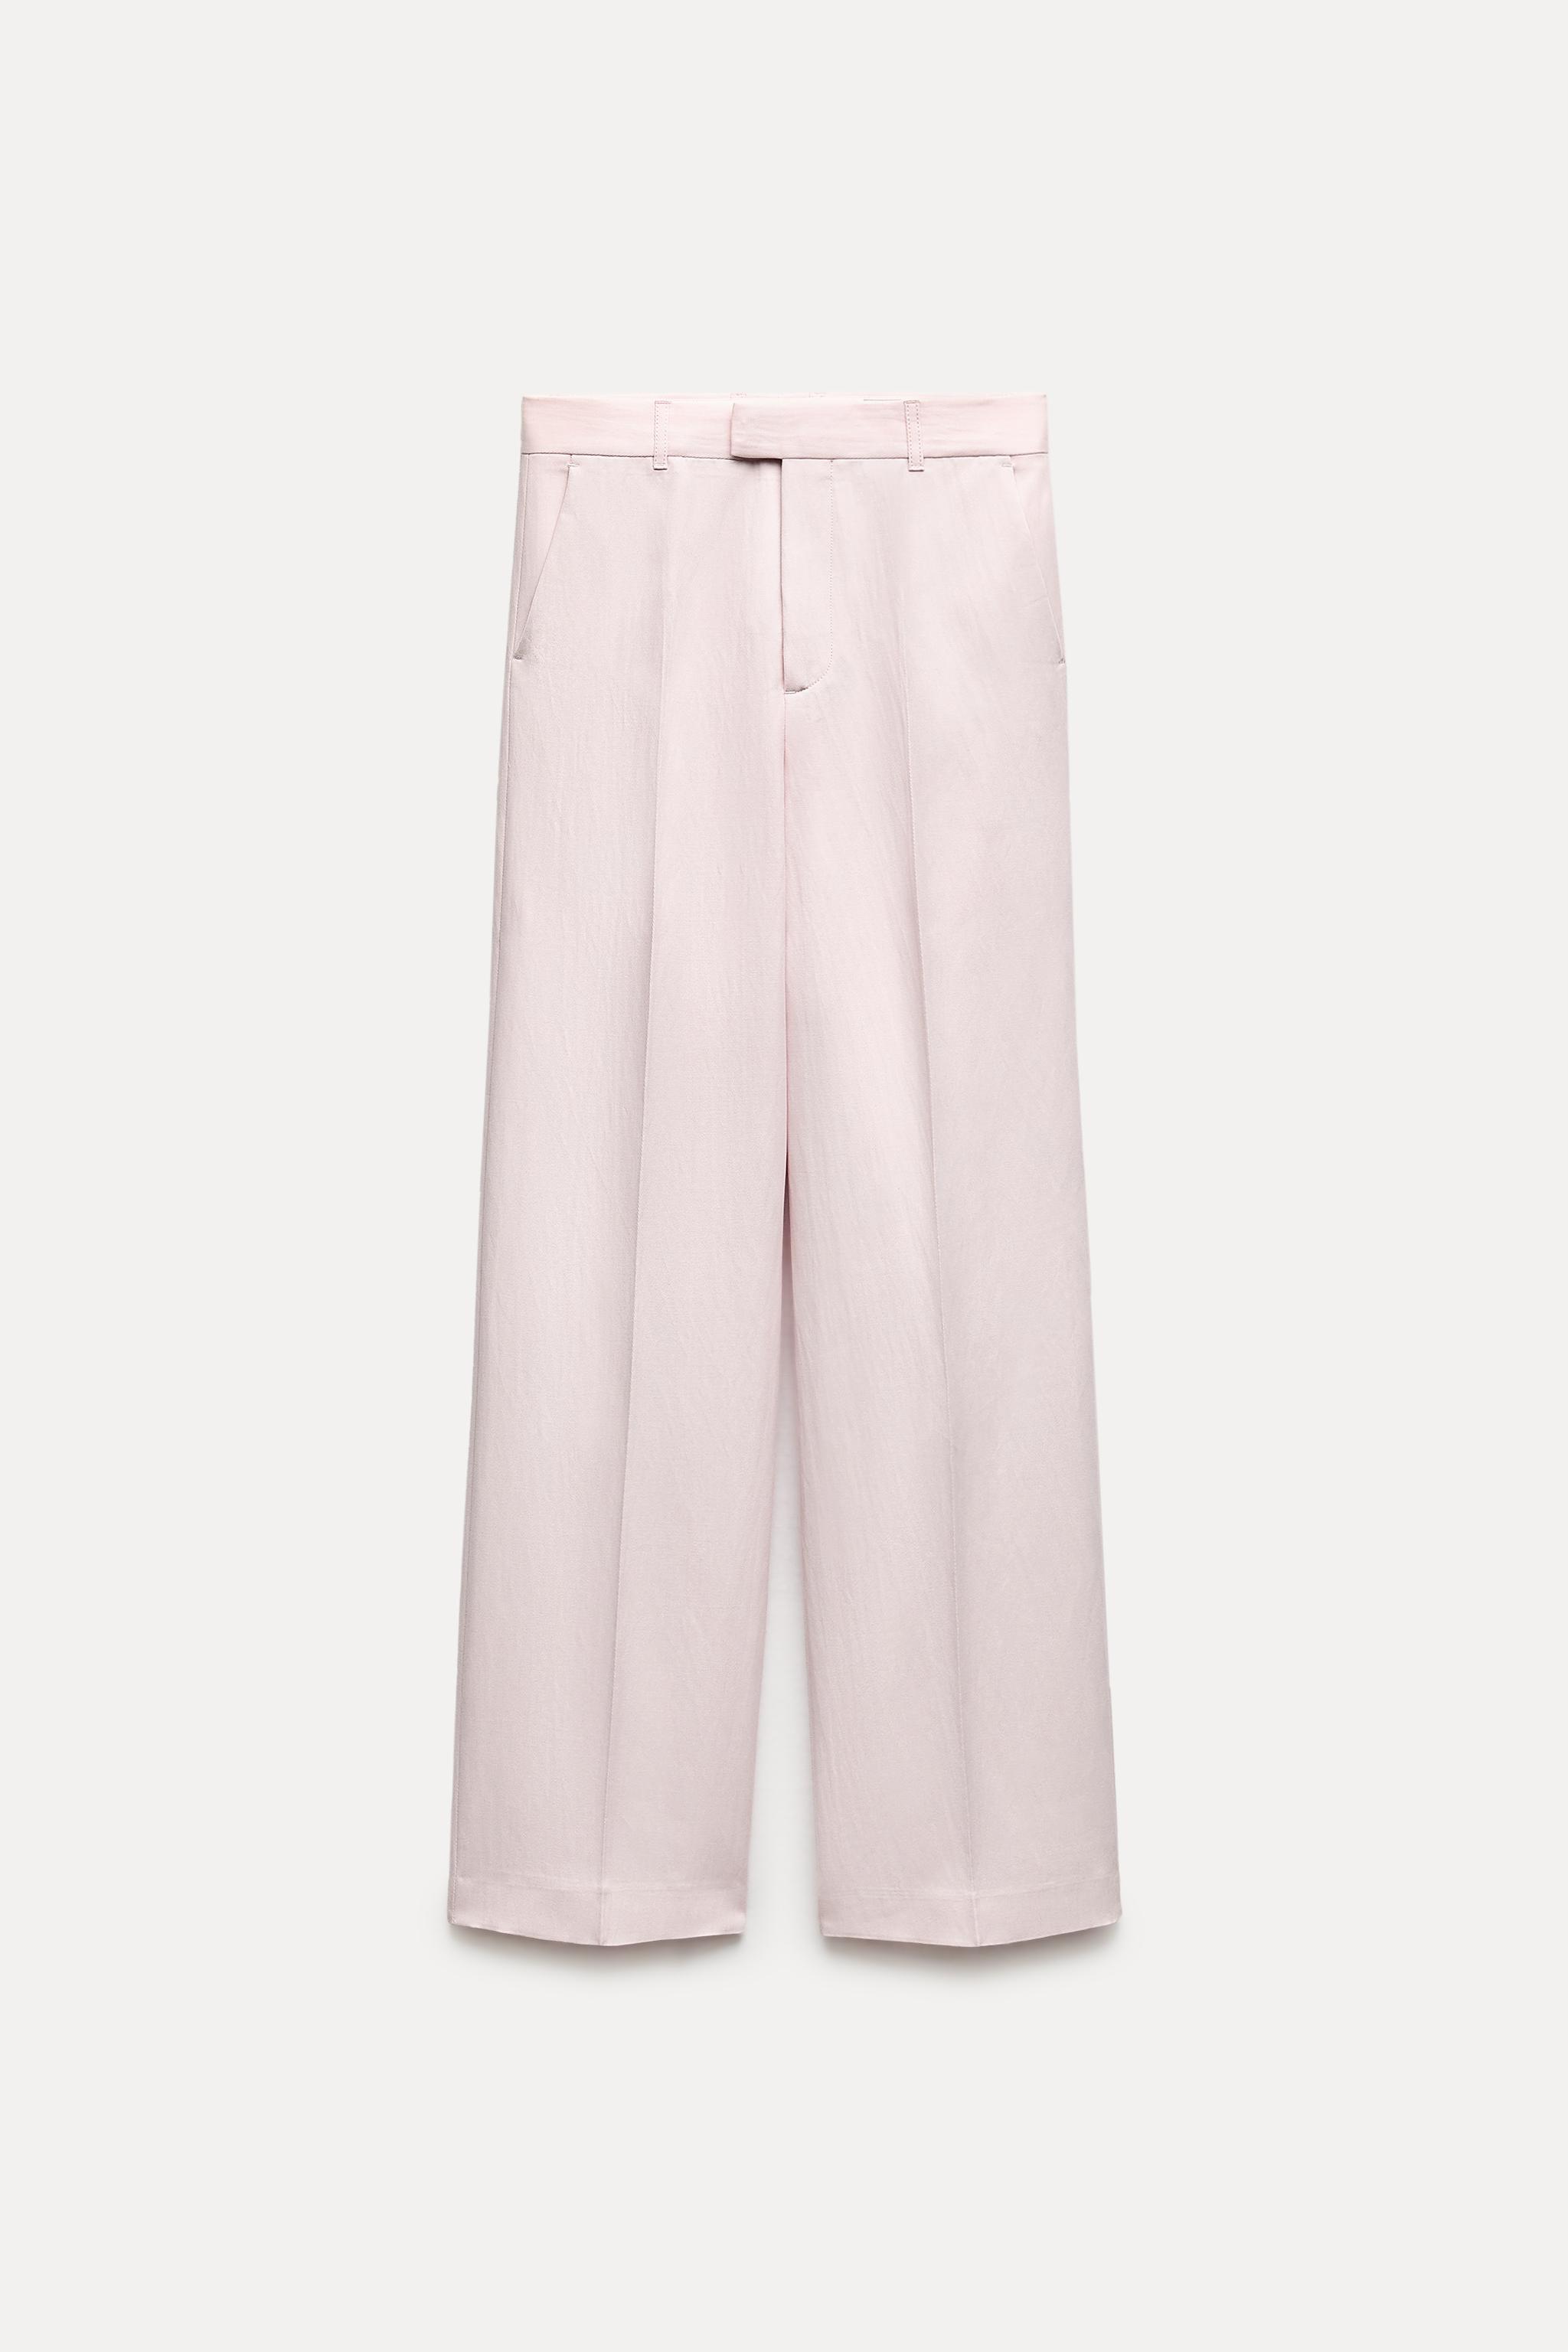 ZW COLLECTION STRAIGHT CUT SUIT PANTS - Pink